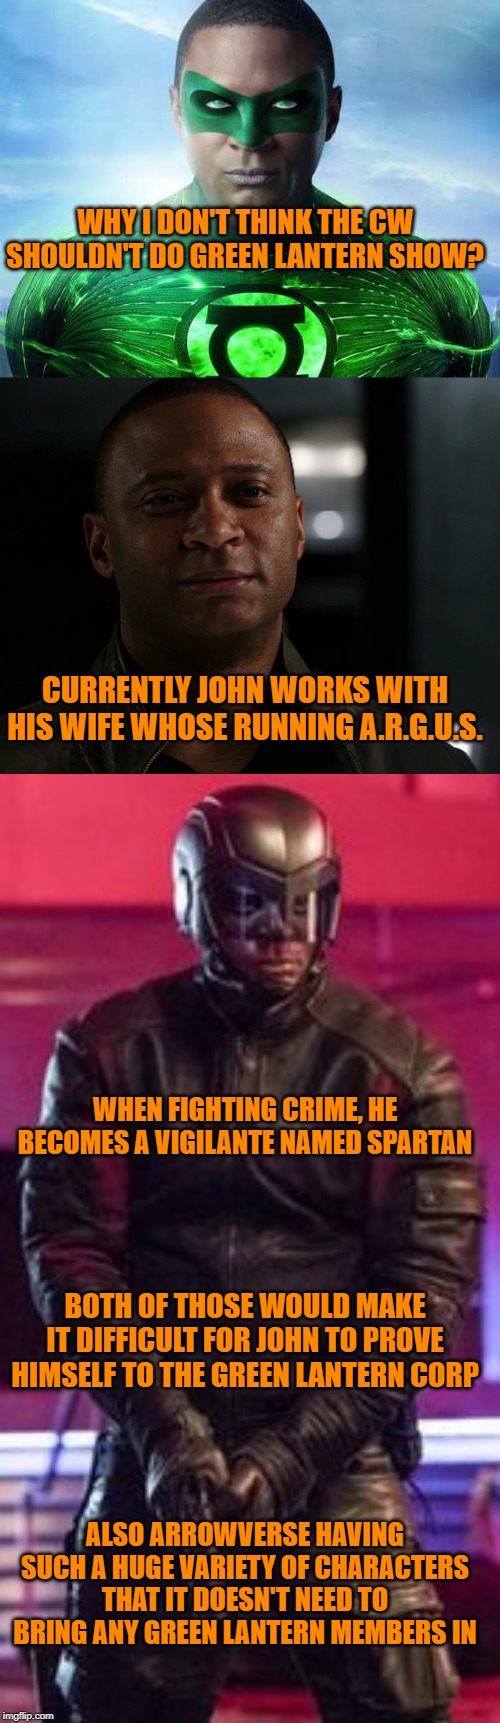 WHY I DON'T THINK THE CW SHOULDN'T DO GREEN LANTERN SHOW? CURRENTLY JOHN WORKS WITH HIS WIFE WHOSE RUNNING A.R.G.U.S. WHEN FIGHTING CRIME, HE BECOMES A VIGILANTE NAMED SPARTAN; BOTH OF THOSE WOULD MAKE IT DIFFICULT FOR JOHN TO PROVE HIMSELF TO THE GREEN LANTERN CORP; ALSO ARROWVERSE HAVING SUCH A HUGE VARIETY OF CHARACTERS THAT IT DOESN'T NEED TO BRING ANY GREEN LANTERN MEMBERS IN | image tagged in dc comics,green lantern,arrow | made w/ Imgflip meme maker